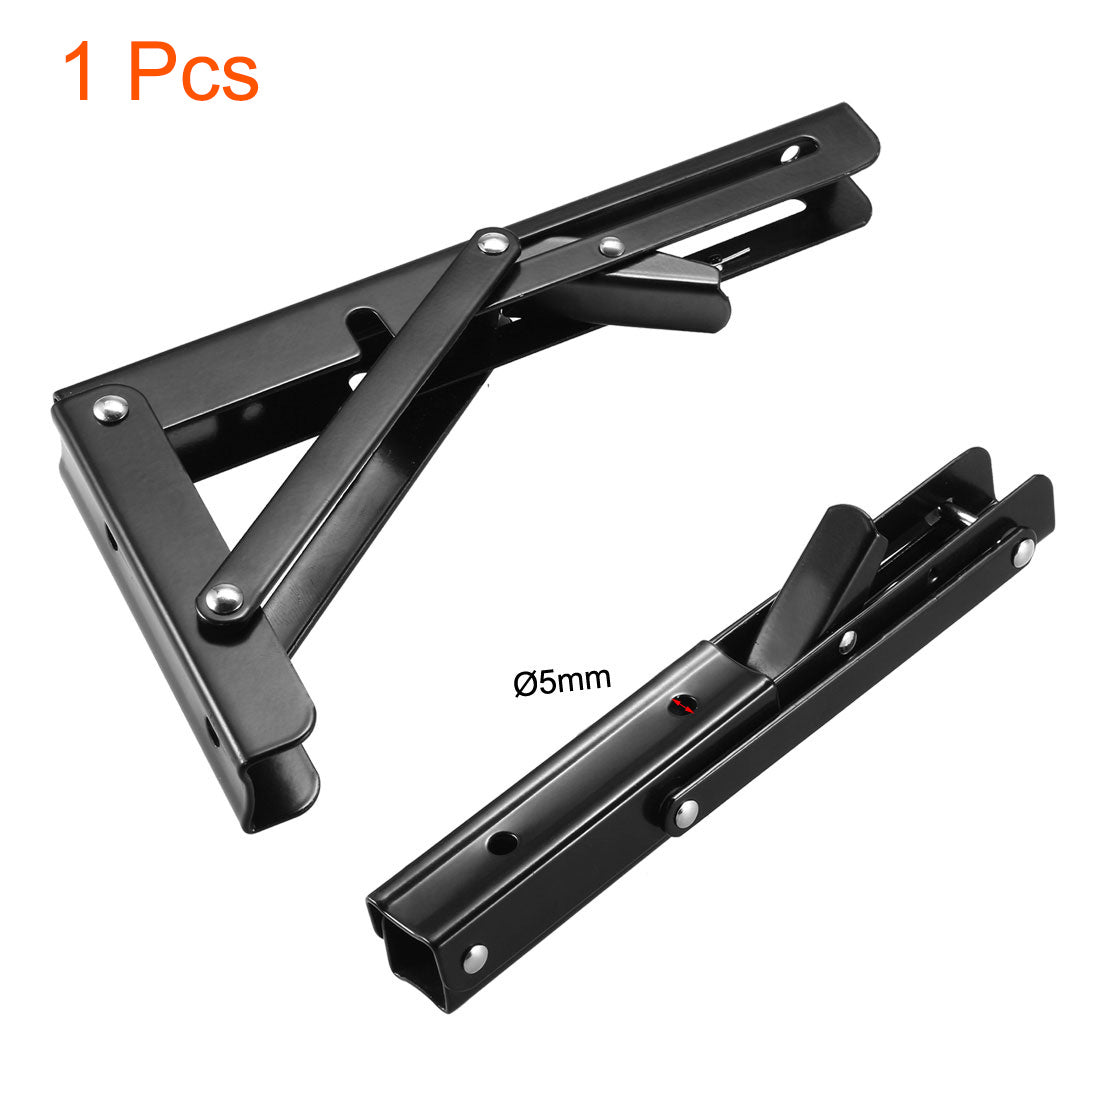 uxcell Uxcell Folding Bracket 8 Inch 200mm for Shelves Table Desk Wall Mounted Support Collapsible Long Release Arm Space Saving Carbon Steel 1pcs